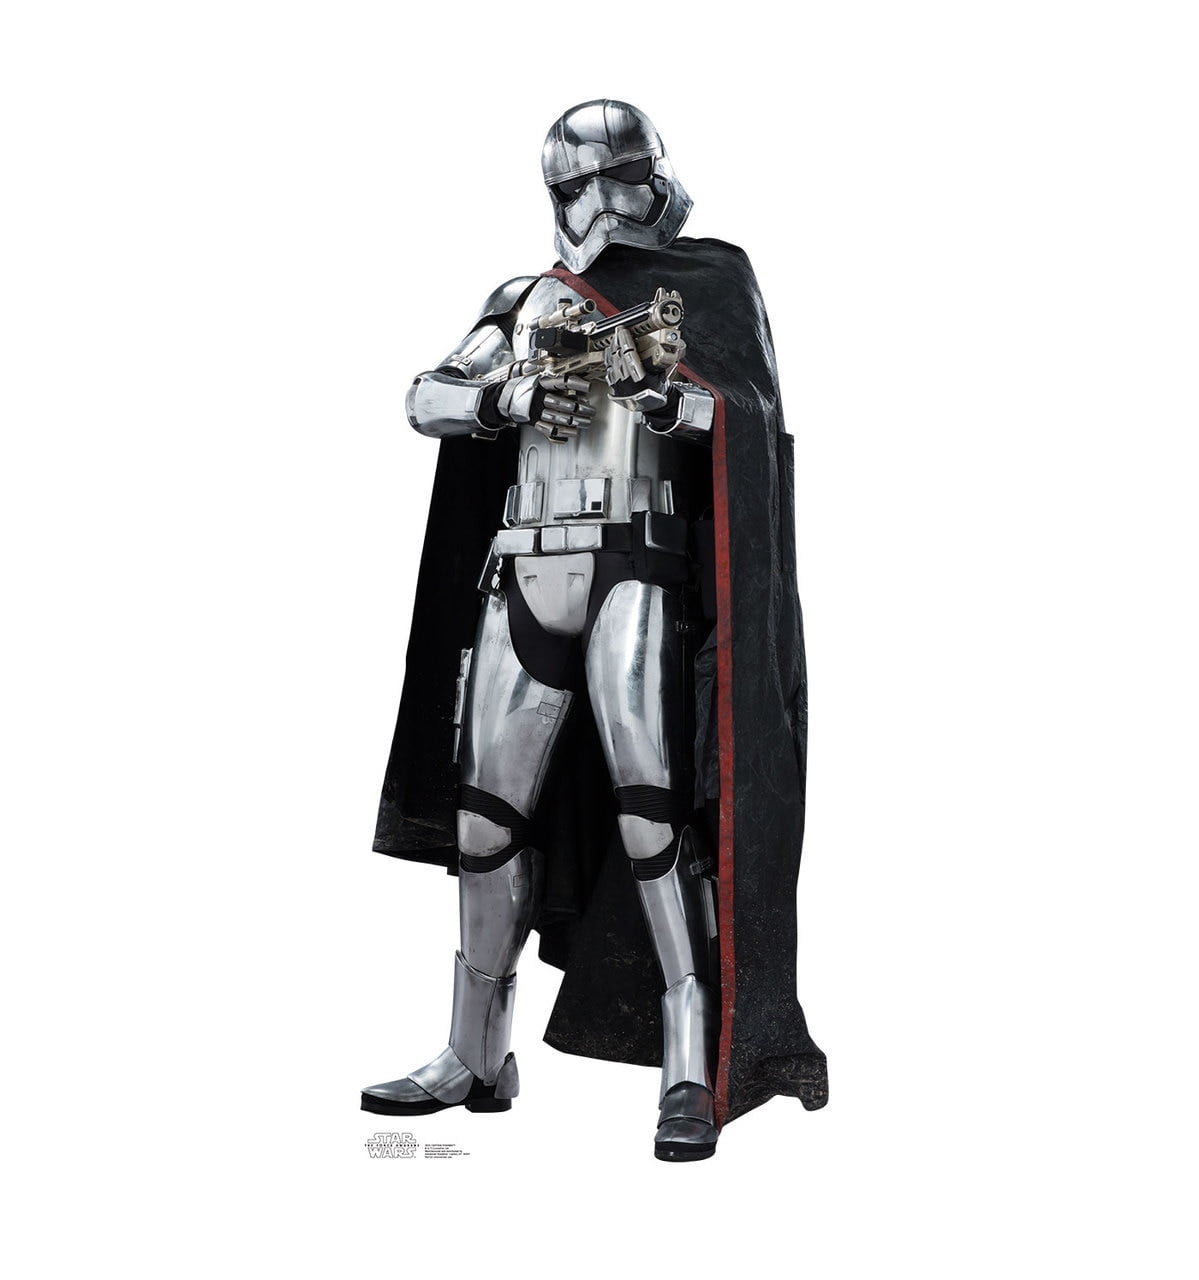 Picture of Advanced Graphics 2033 74 x 33 in. Captain Phasma Cardboard Cutout, Star Wars VII - The Force Awakens